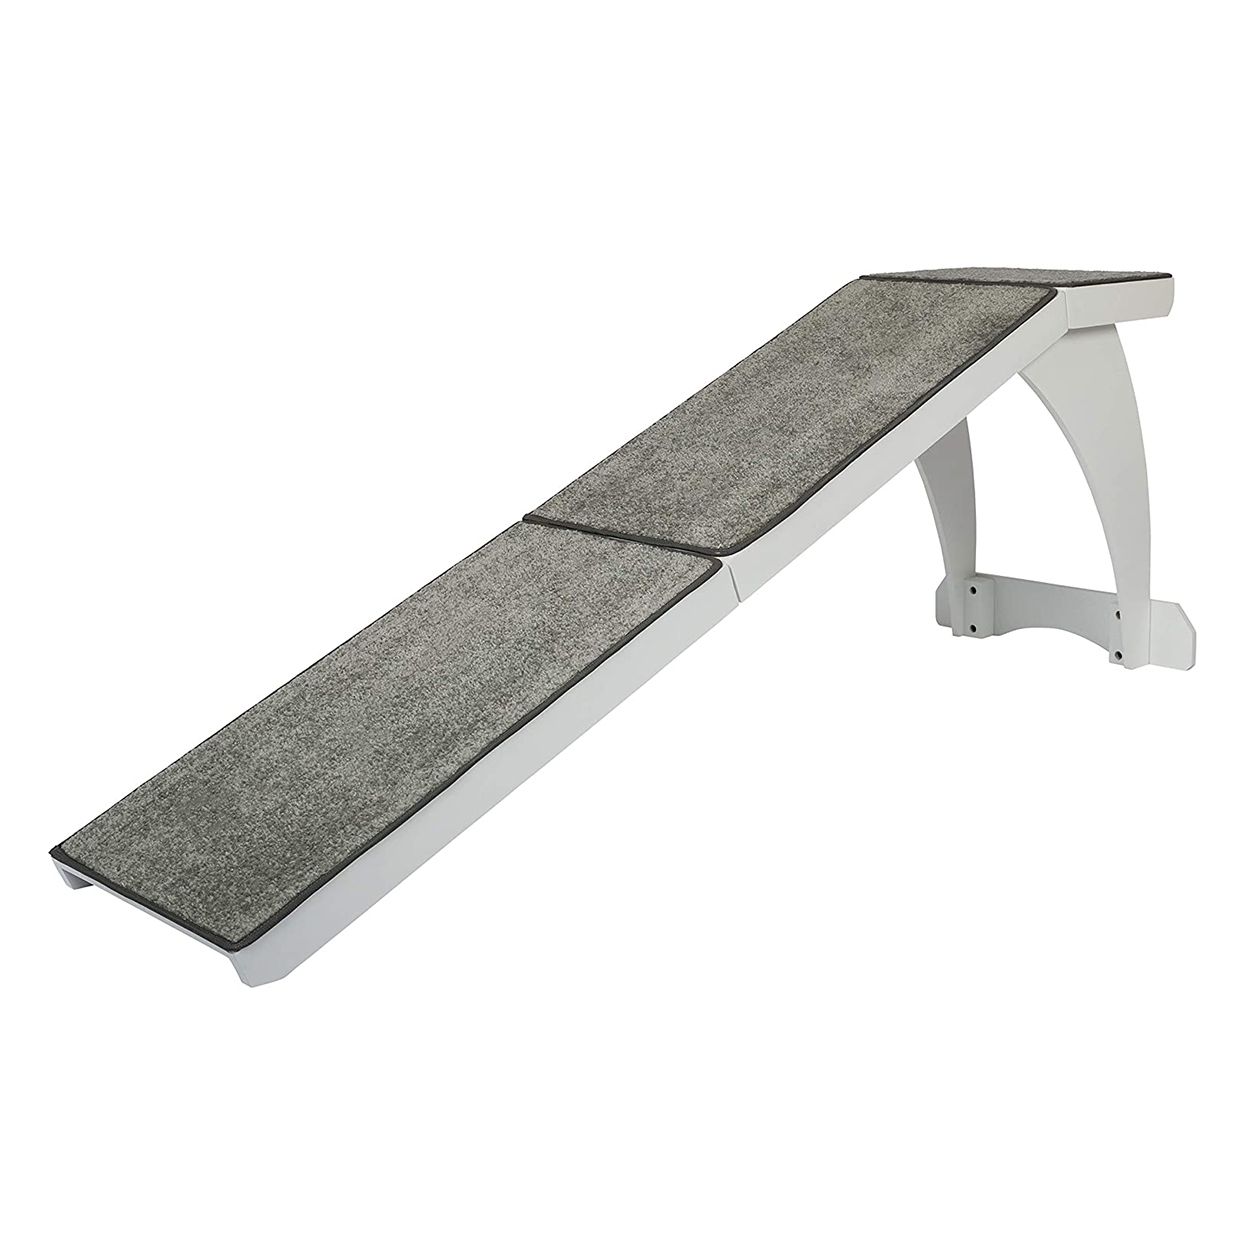 Photo of PetSafe CozyUp Bed Ramp for Dogs and Cats against a white background